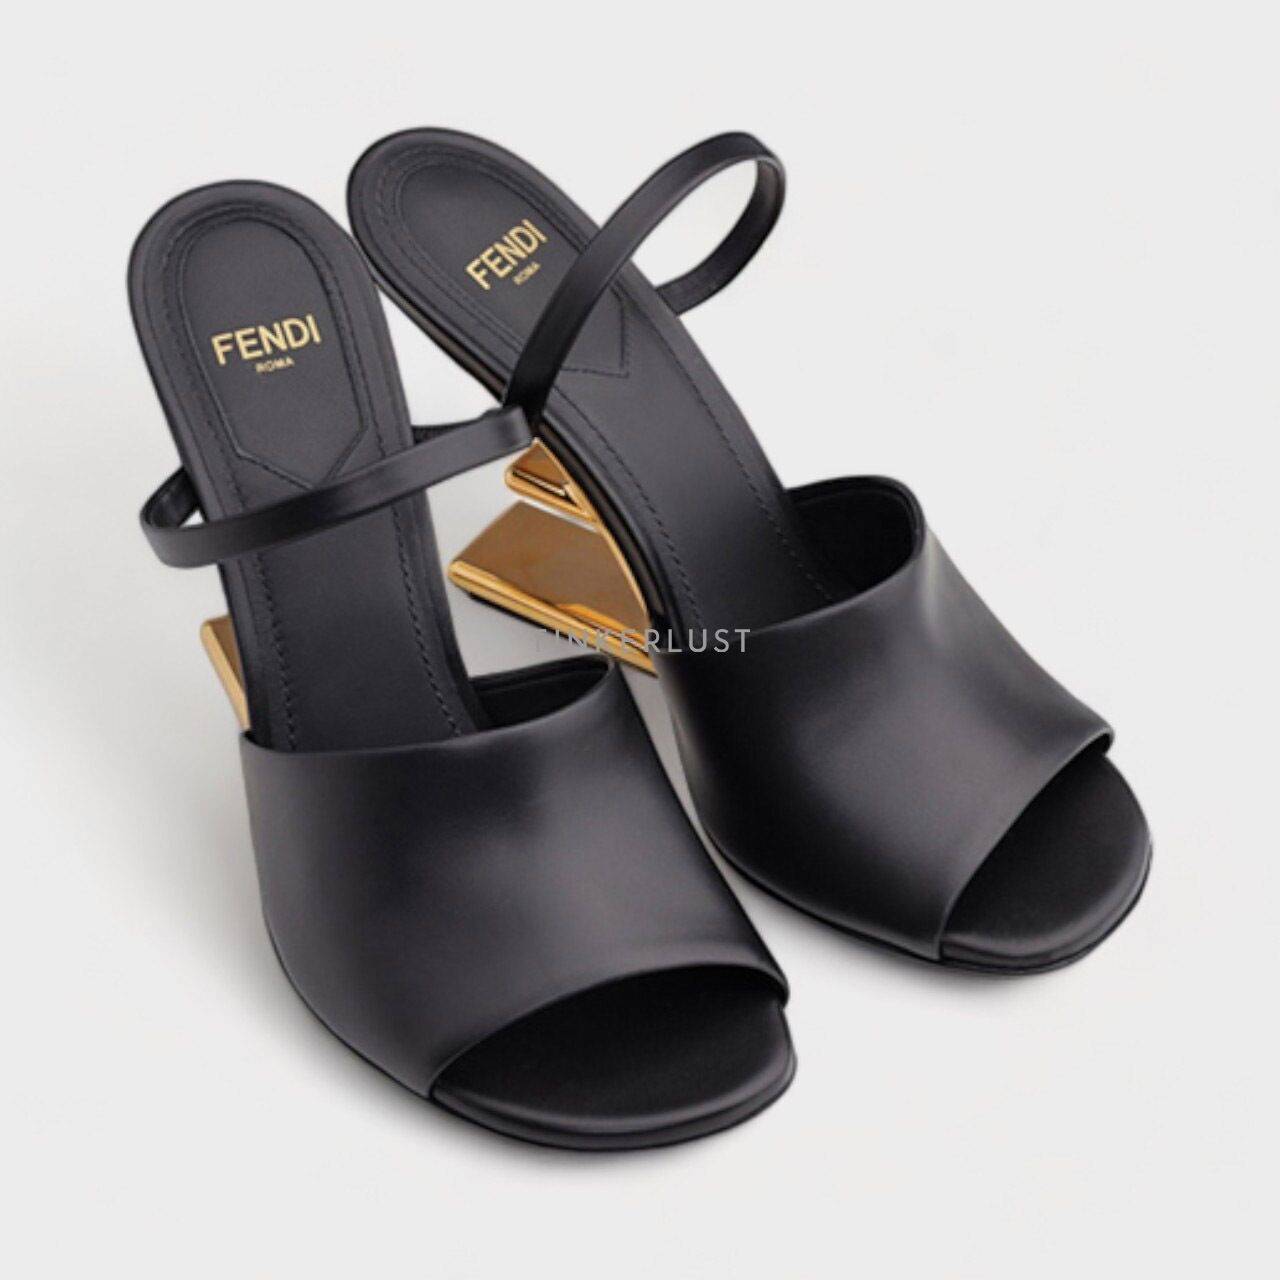 FENDI Women First Open Toe Sandals 65mm in Black Leather with Diagonal F-Shaped Heels